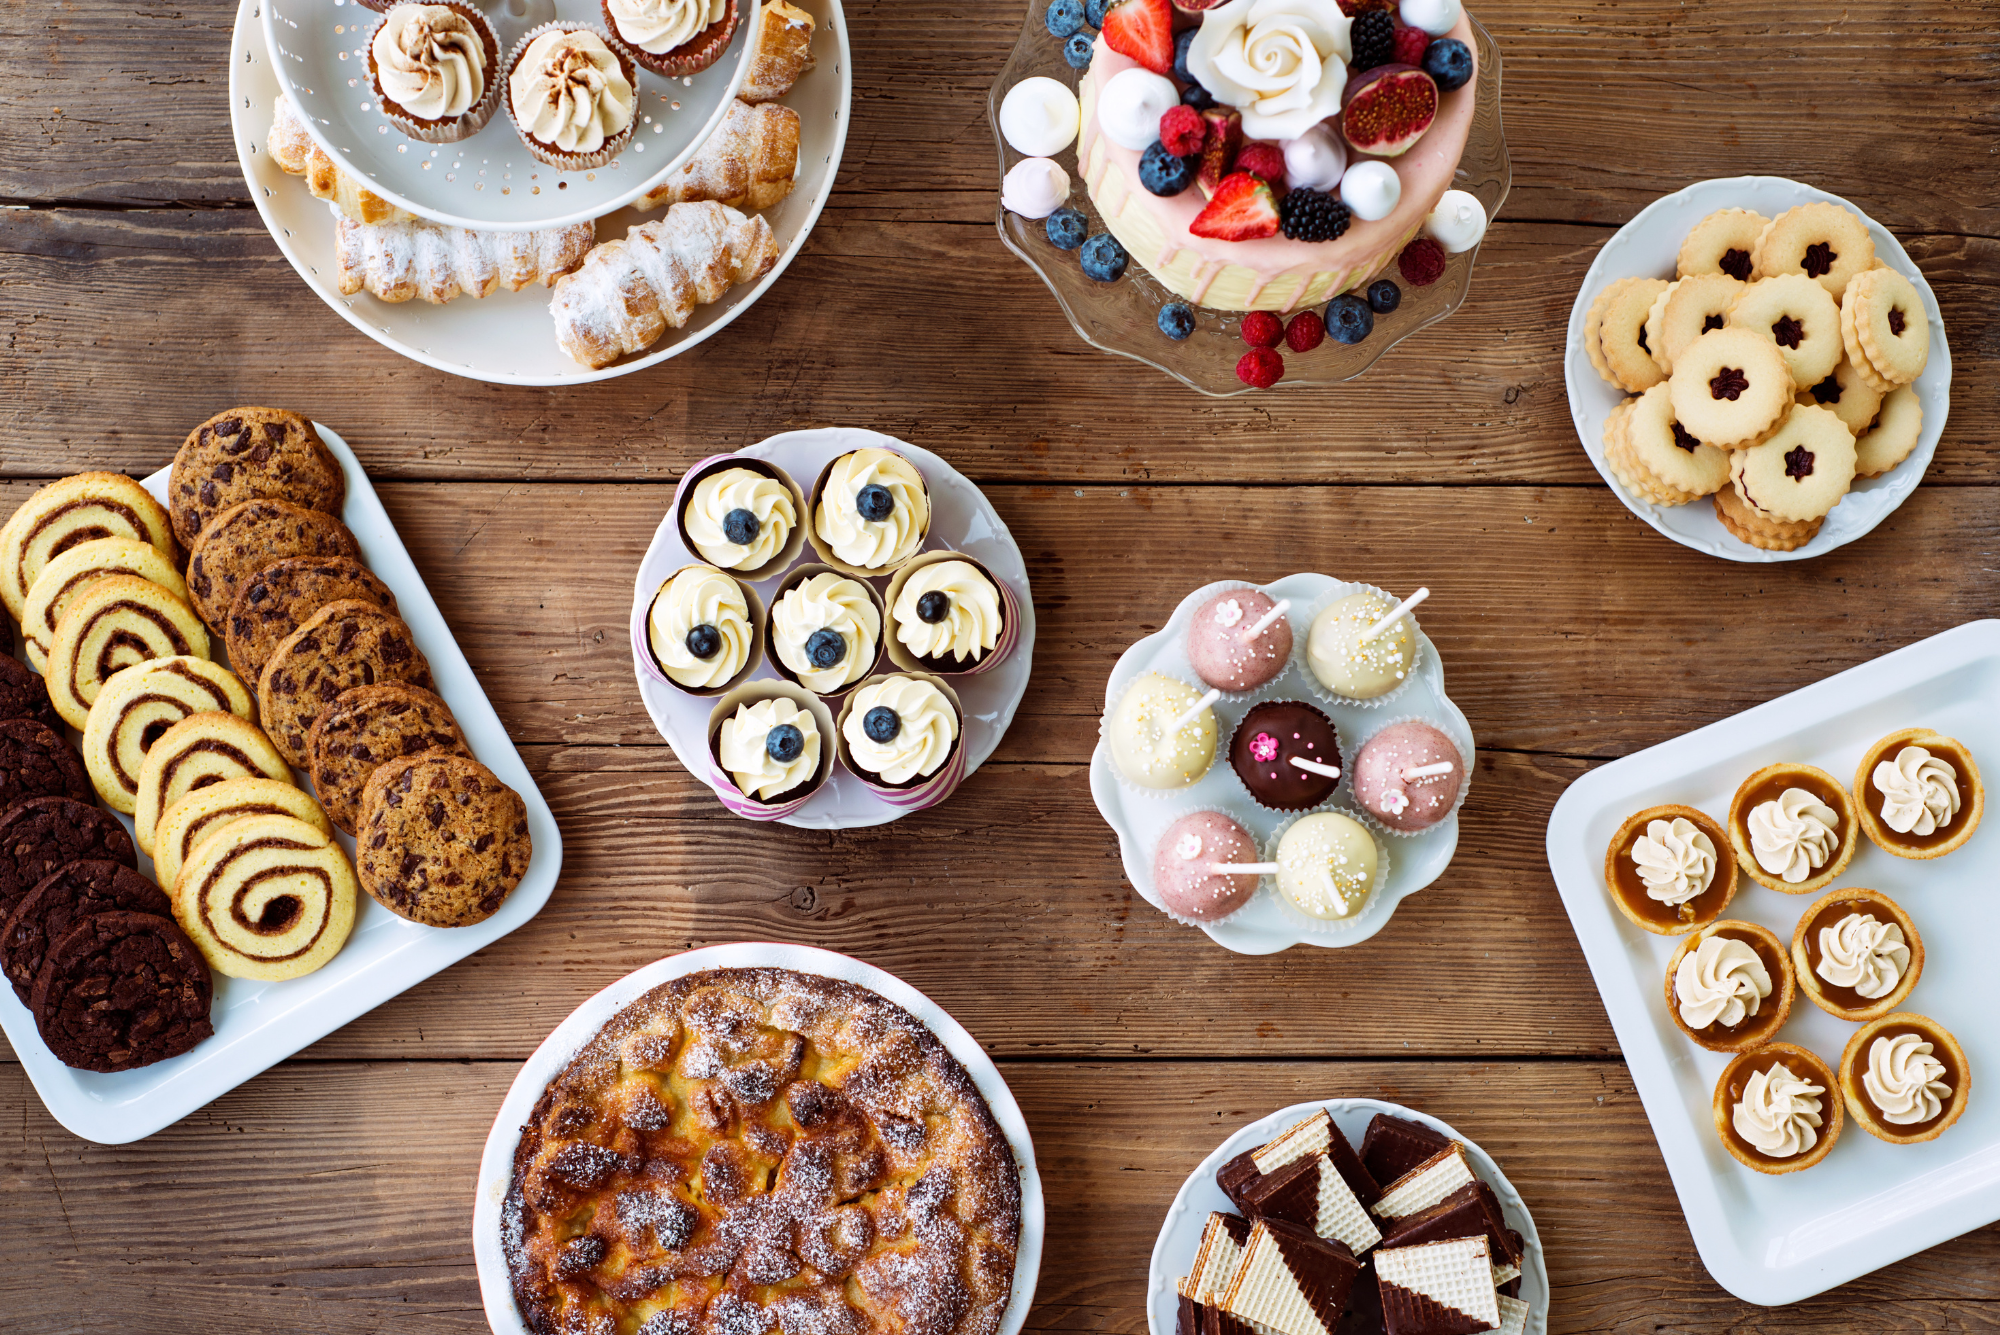 An overhead view of a table full of assorted desserts, representing the benefits of enjoying dessert.